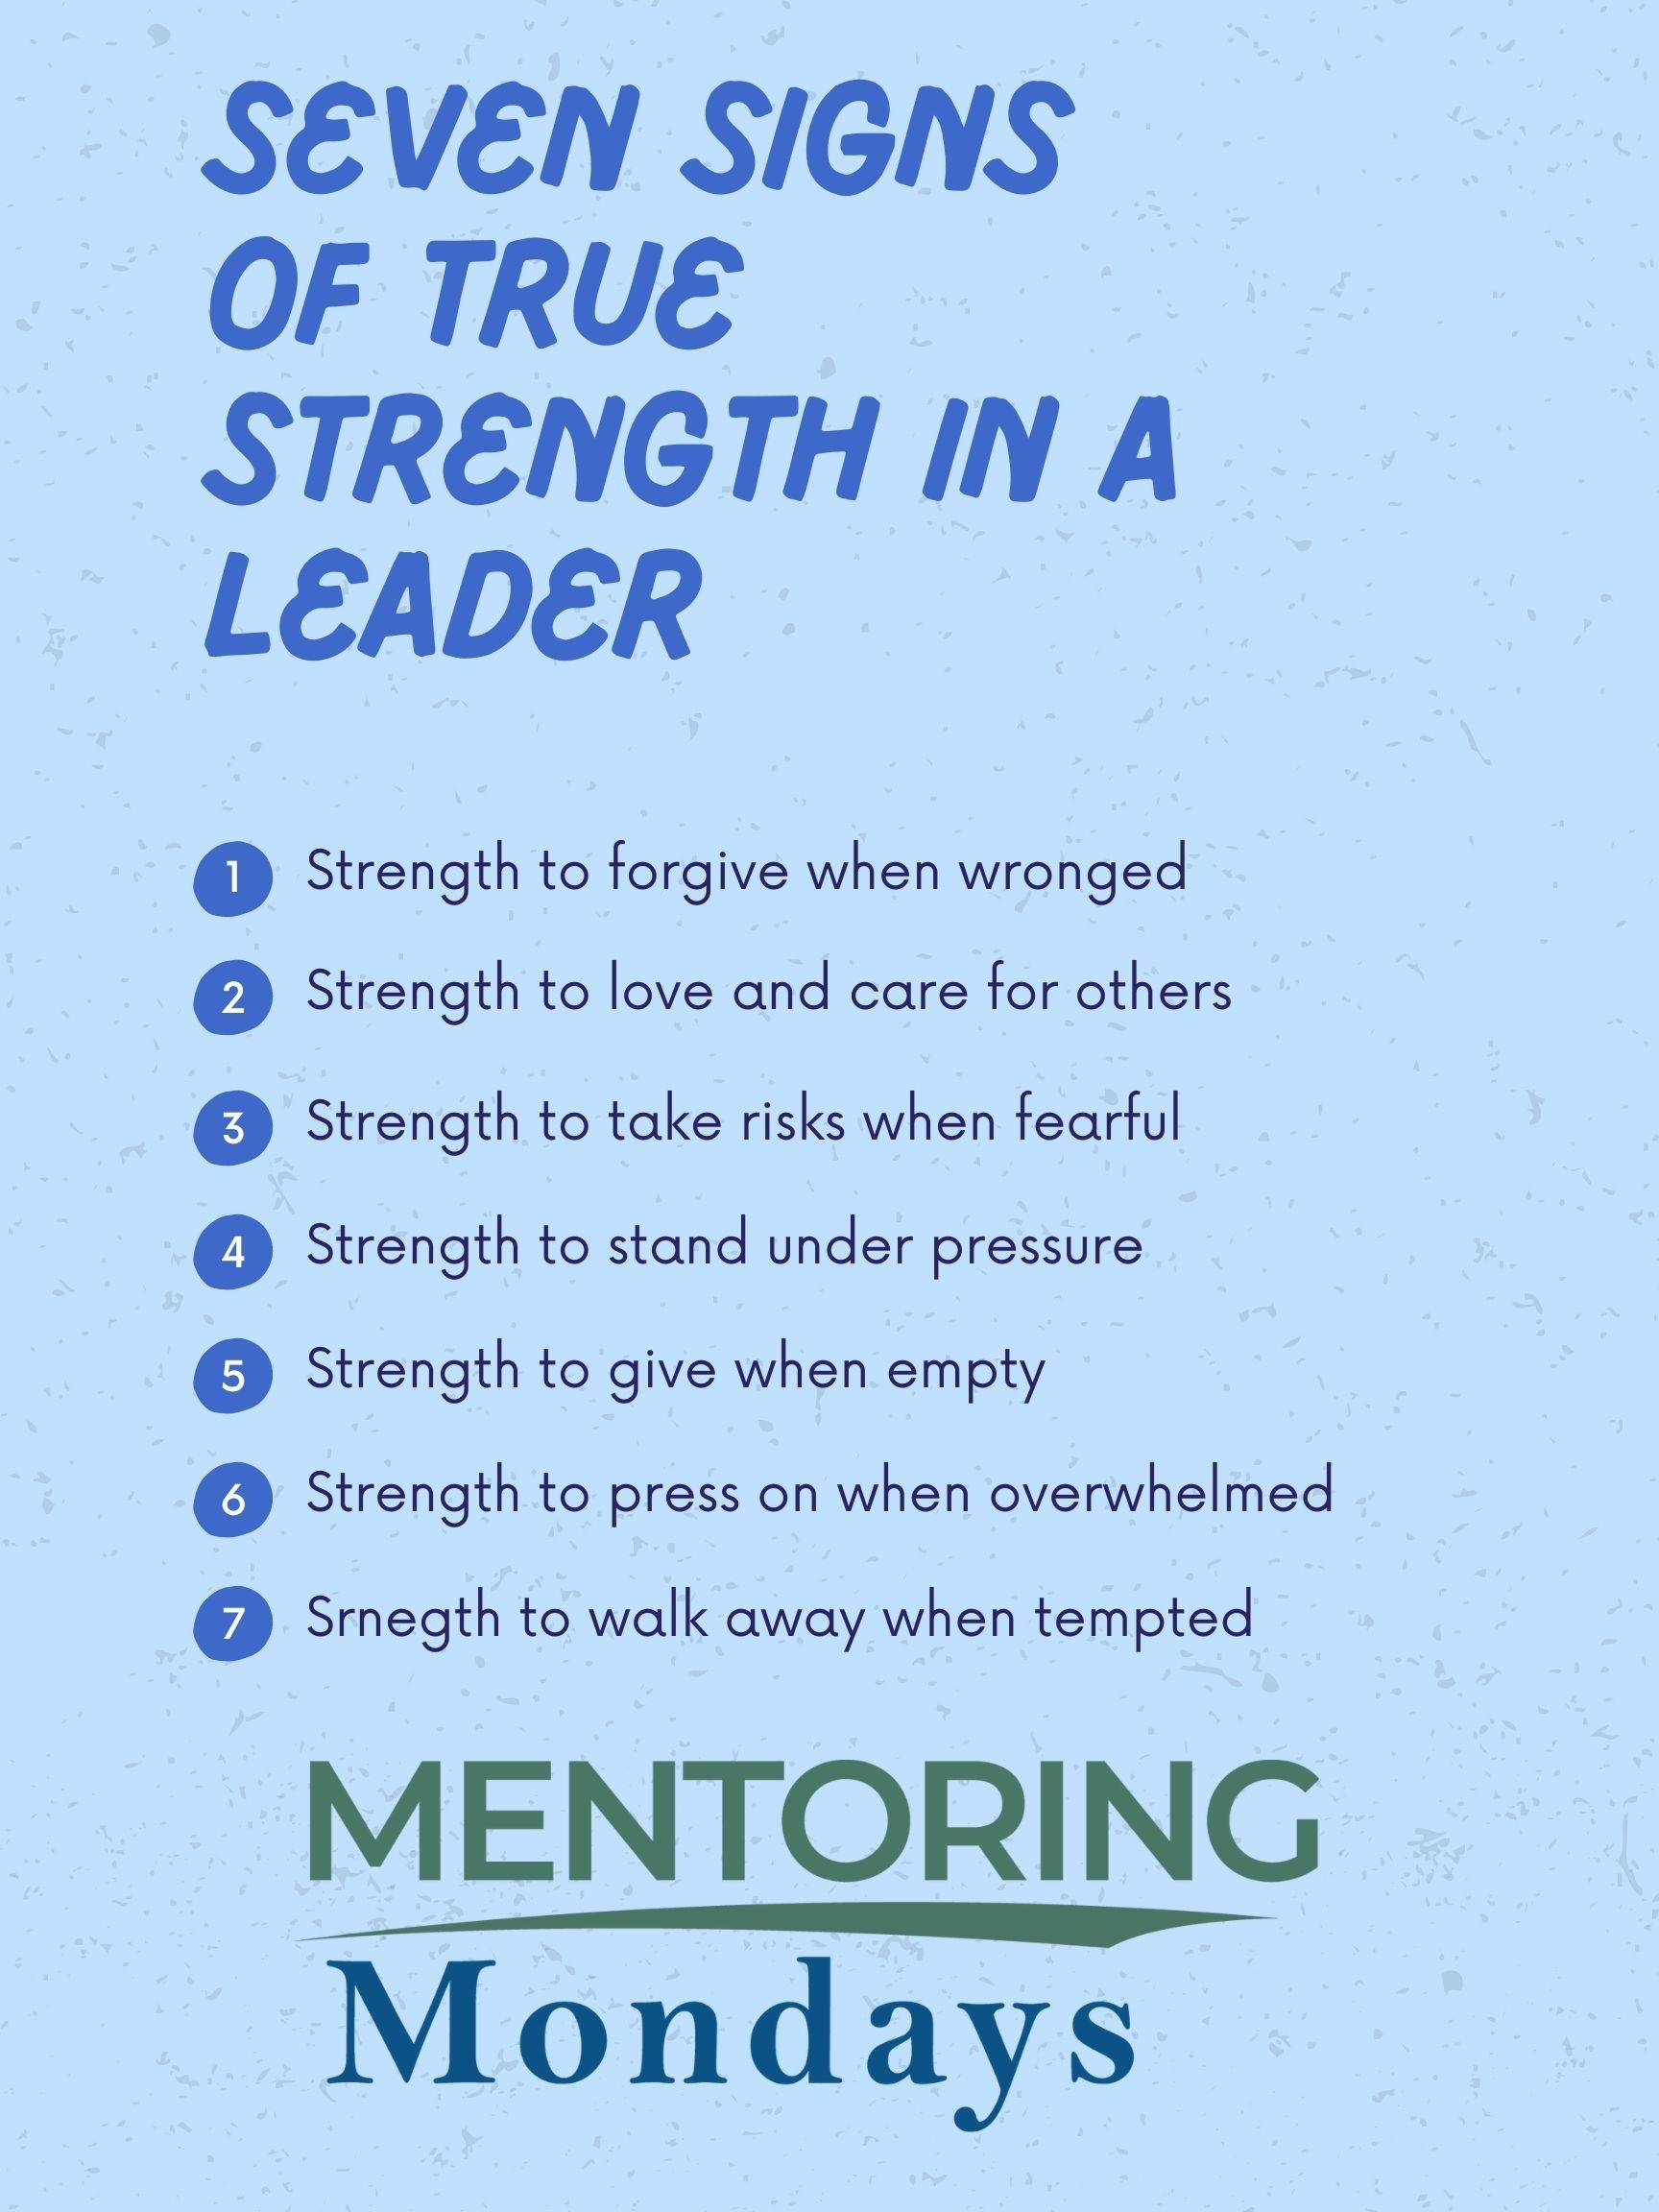 Seven Signs of True Strength in A Leader